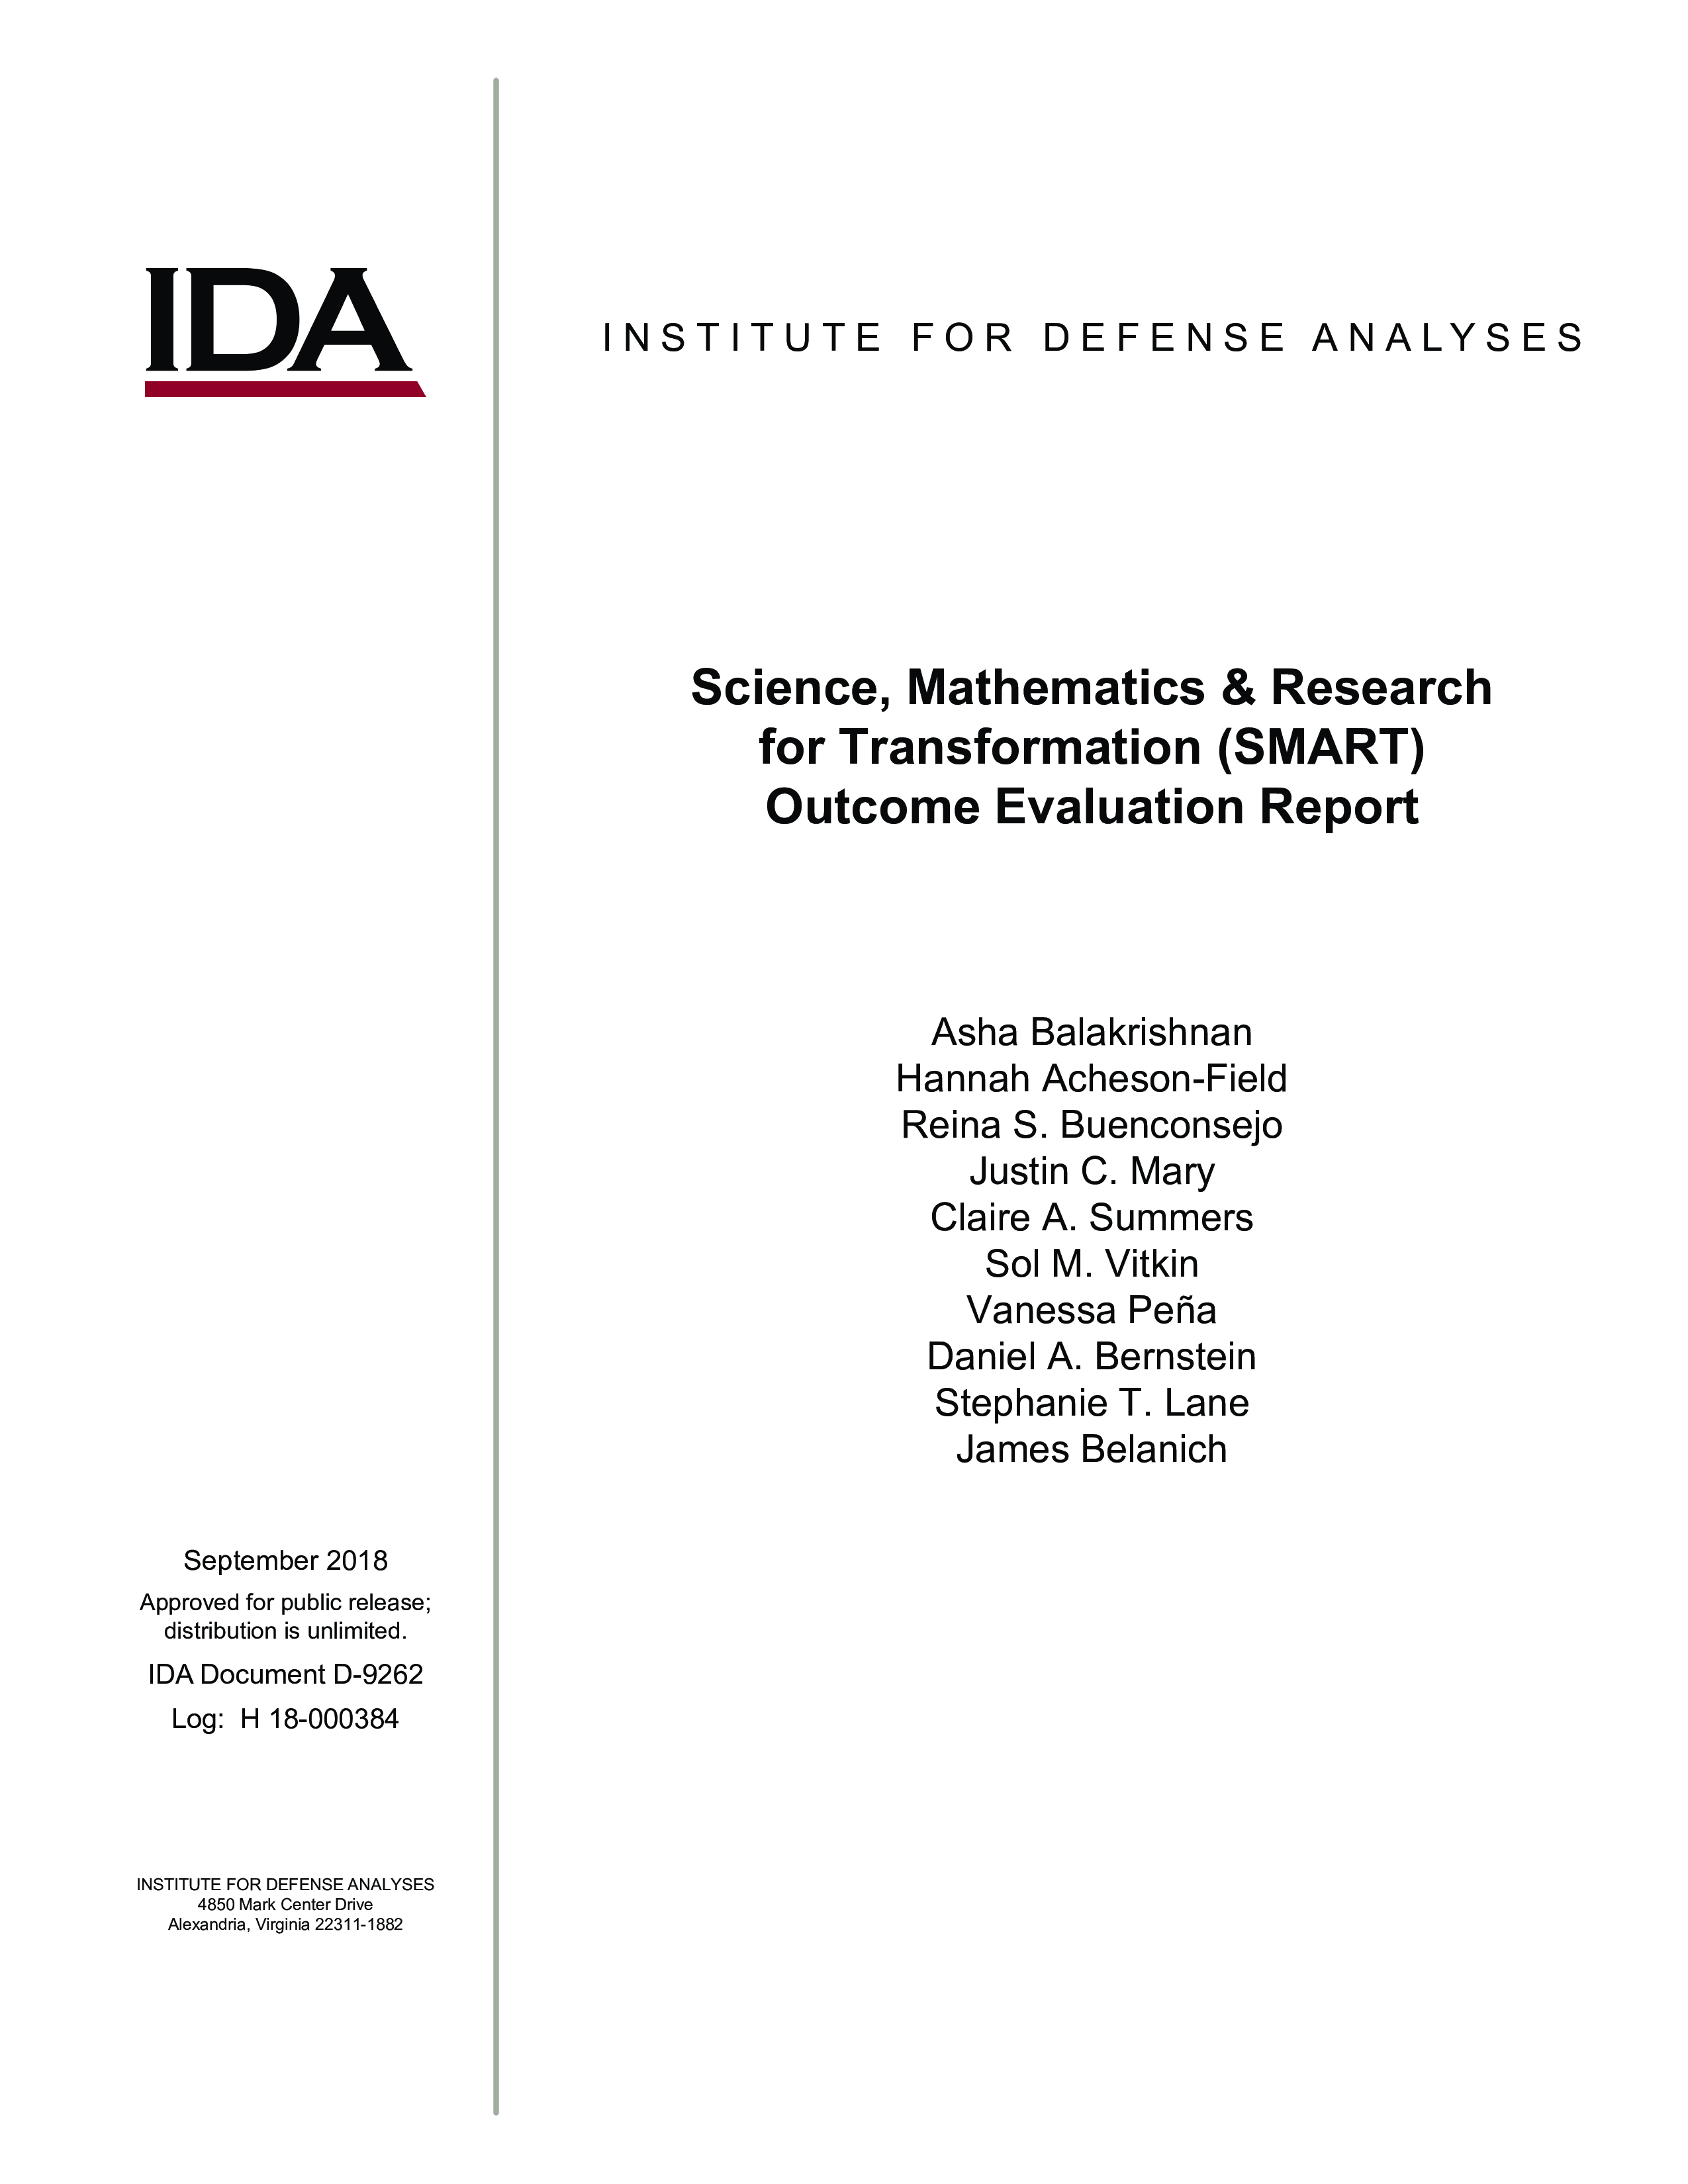 Science, Mathematics & Research for Transformation (SMART) Outcome Evaluation Report